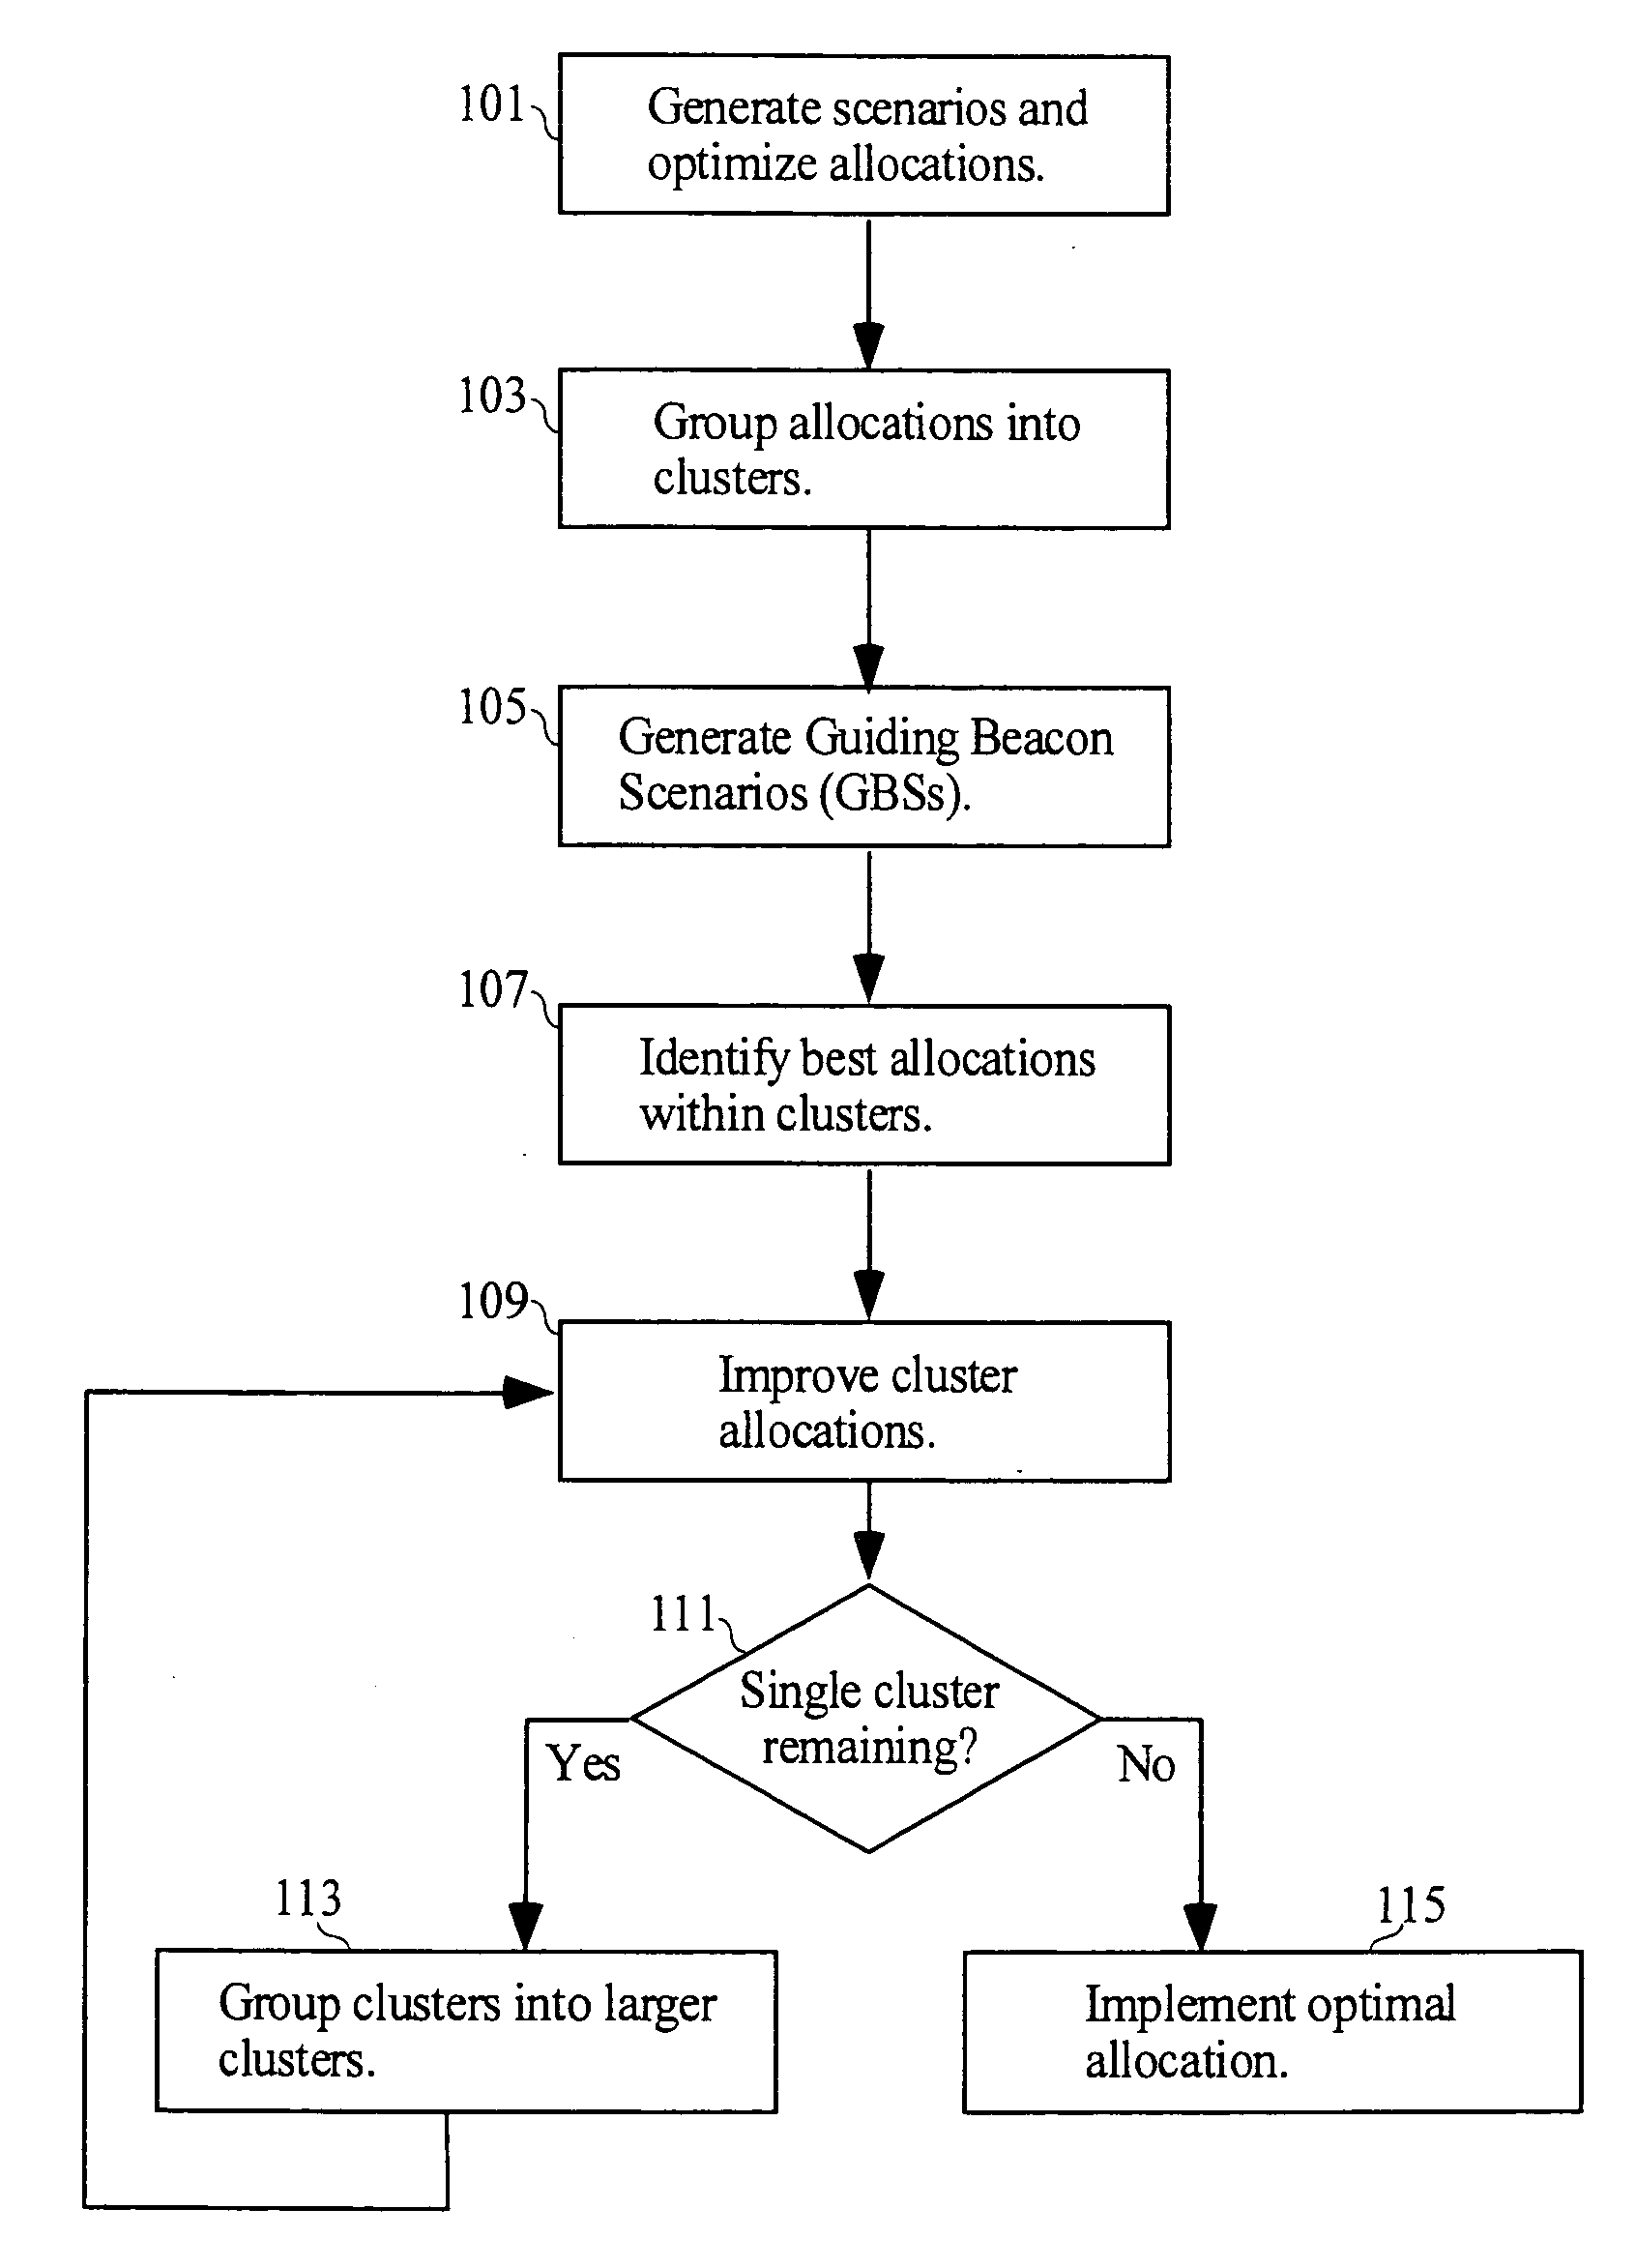 Methods apparatus for allocating resources in the presence of uncertainty